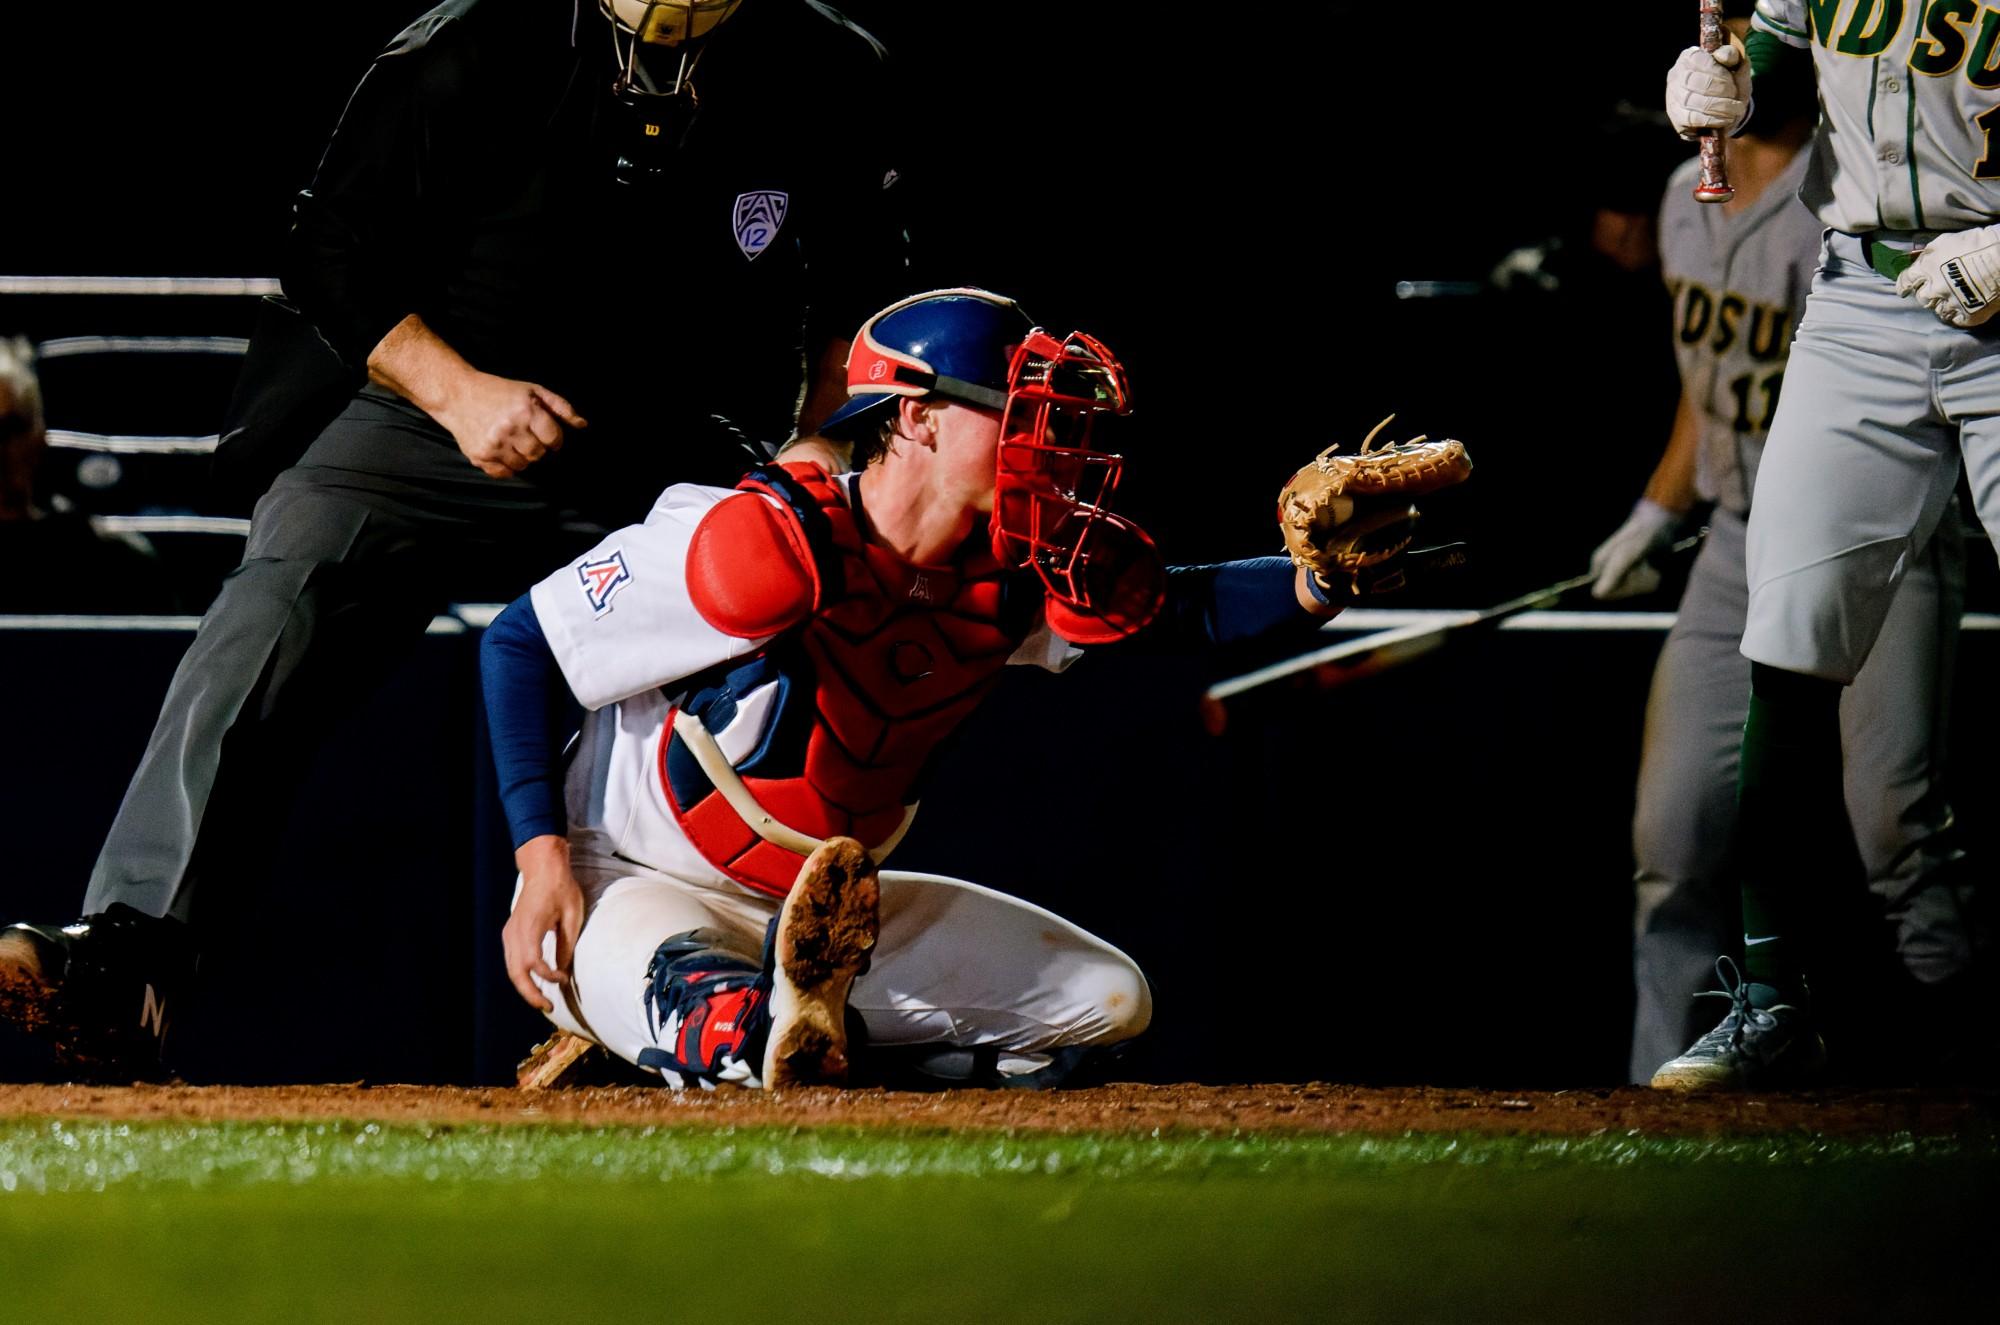 Arizona baseball's slump continues after being swept at home against Oregon  – The Daily Wildcat